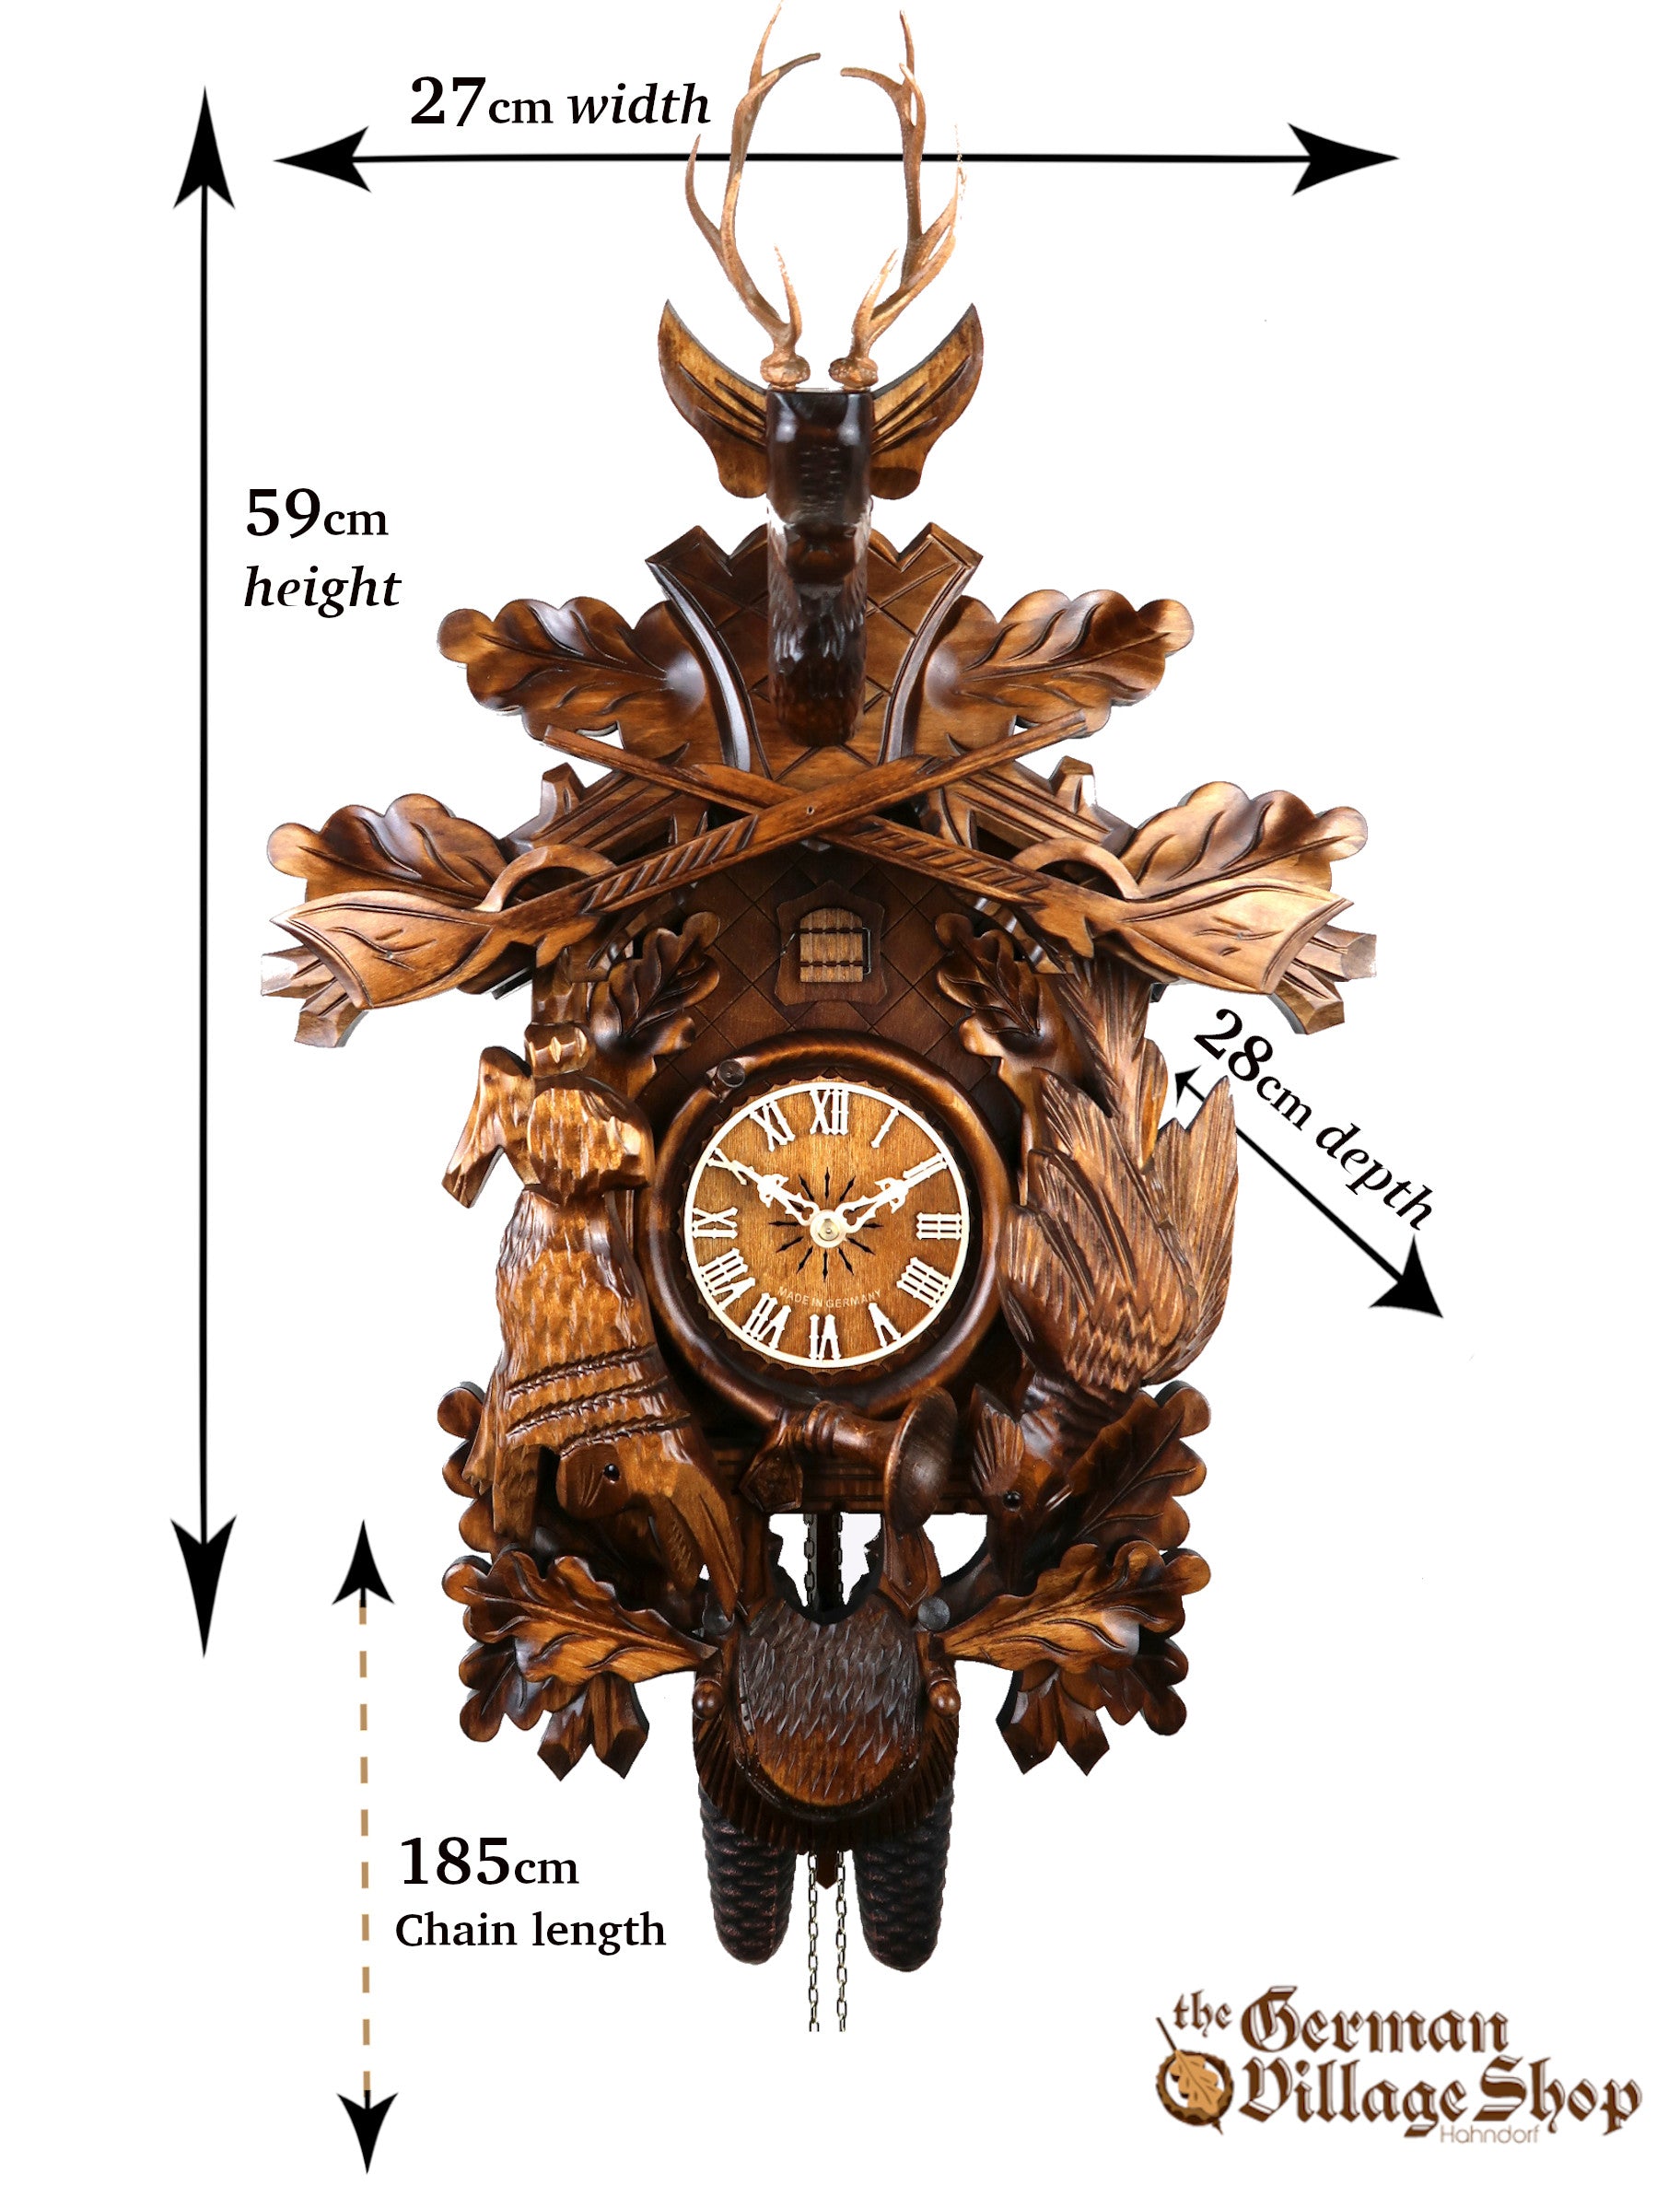 Size of the German Cuckoo clock import and for sale in Australia